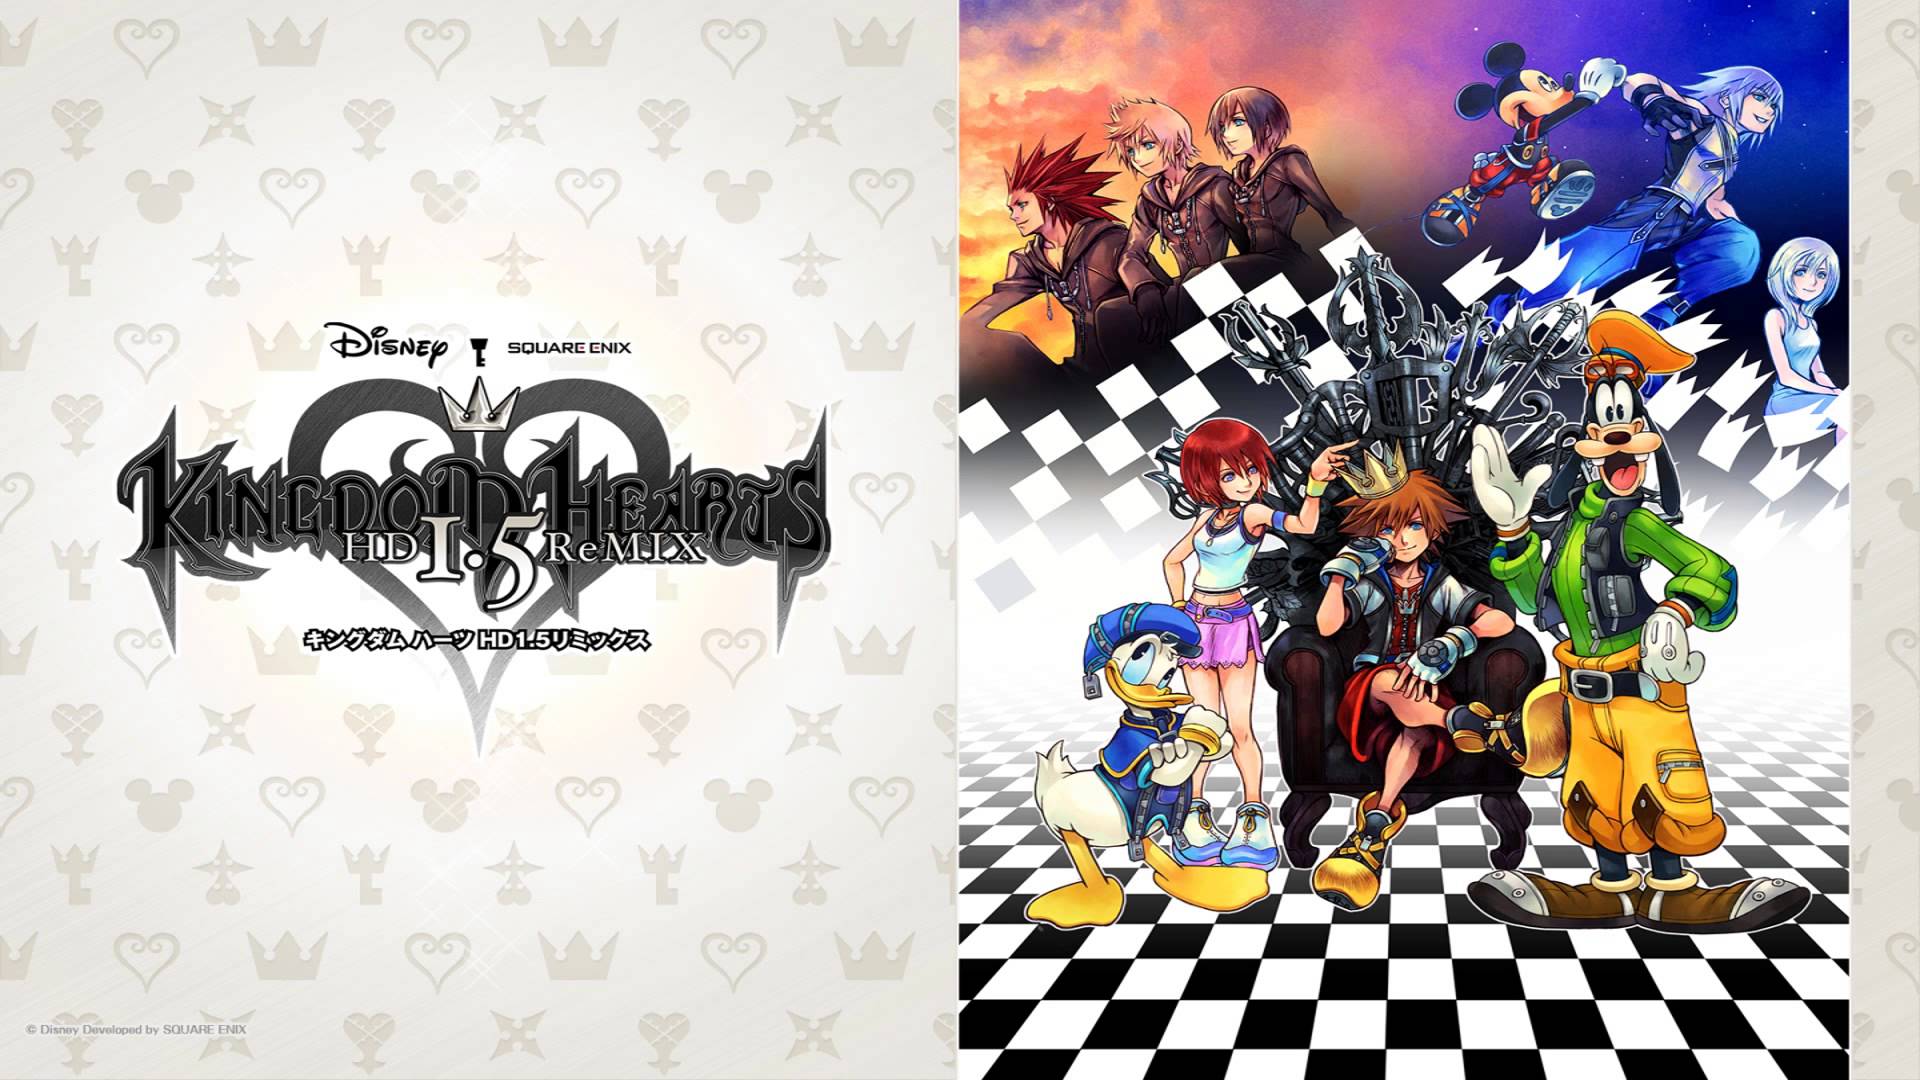 Video Game Kingdom Hearts HD Wallpaper | Background Image